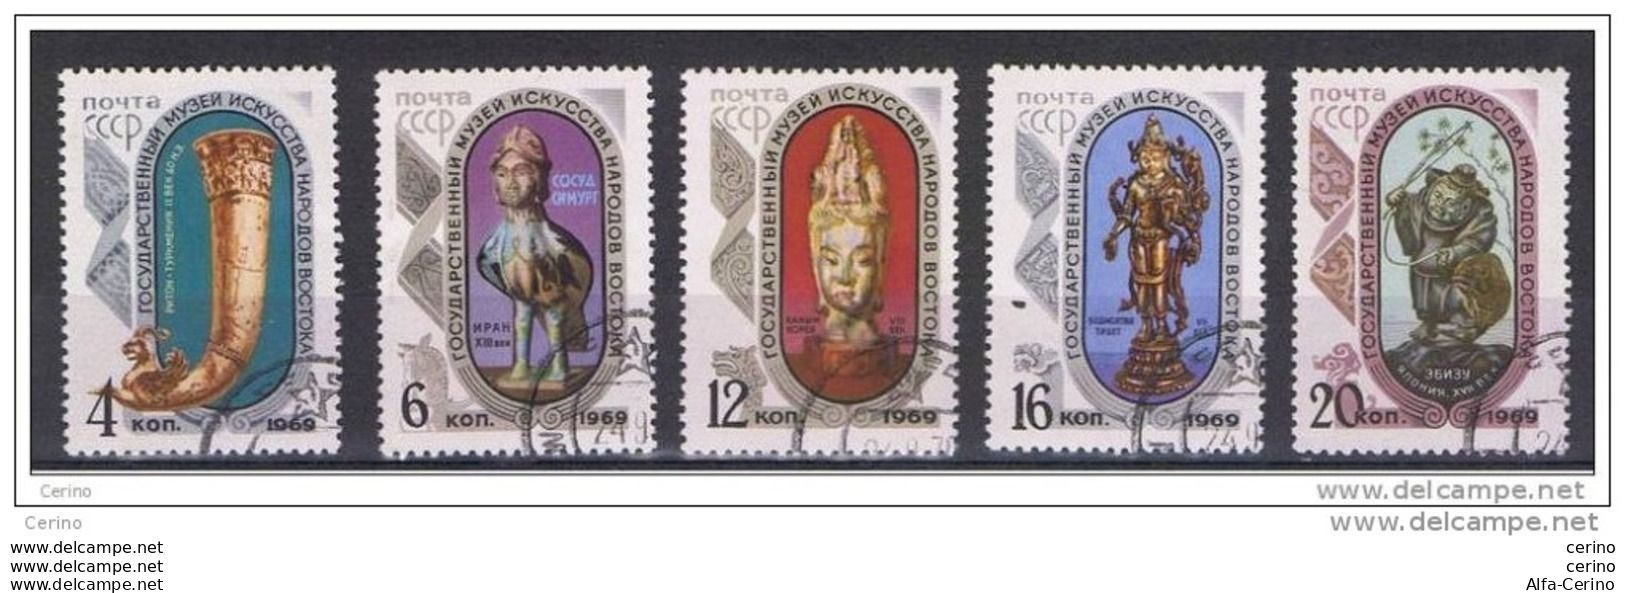 RUSSIA:  1969  MUSEO  -  S. CPL. 5  VAL. US. -  YV/TELL. 3522/26 - Oblitérés